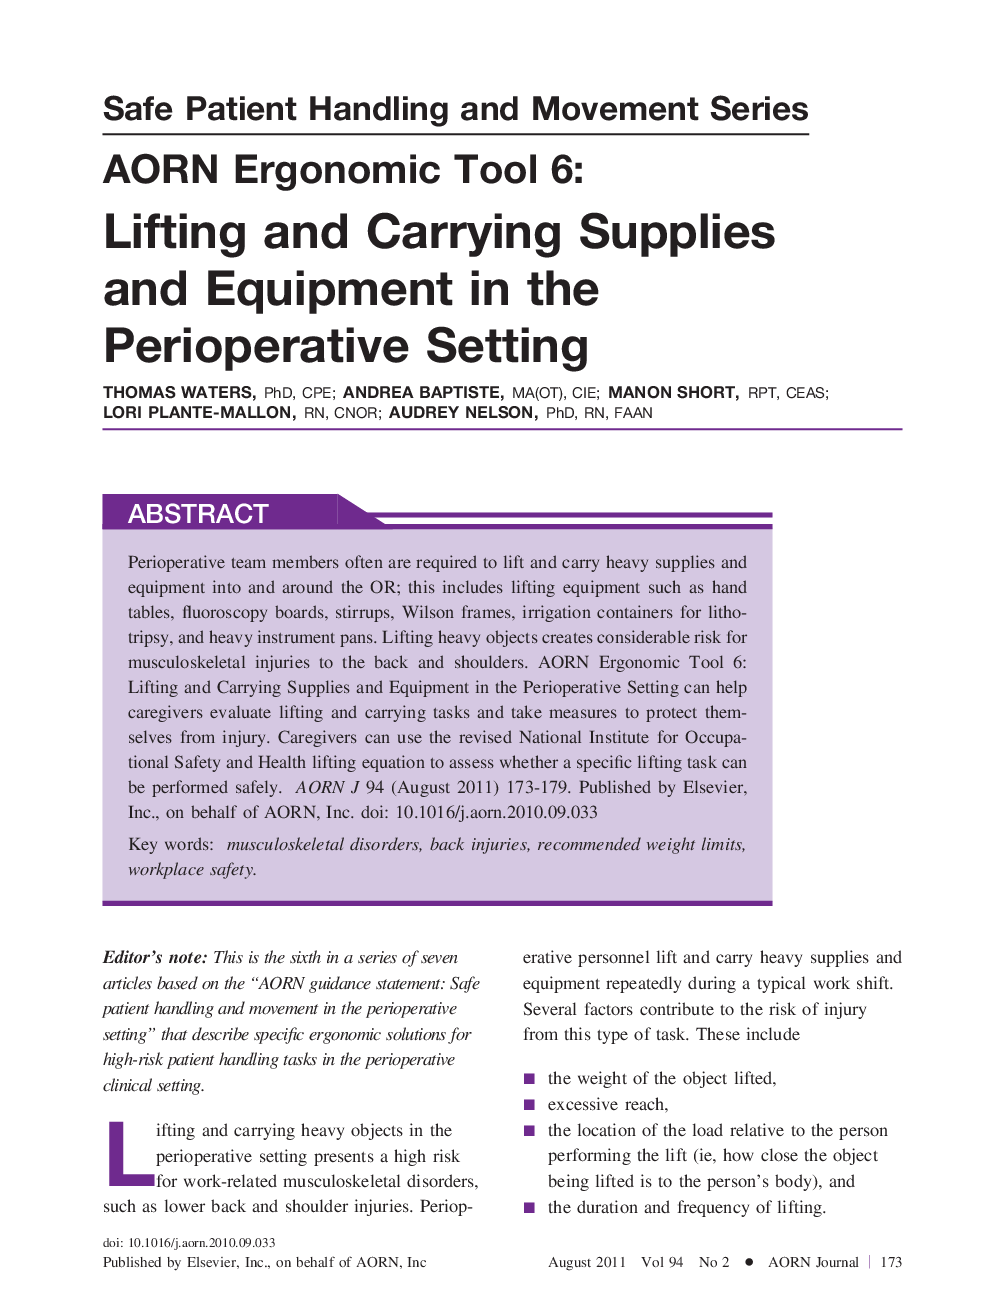 AORN Ergonomic Tool 6: Lifting and Carrying Supplies and Equipment in the Perioperative Setting